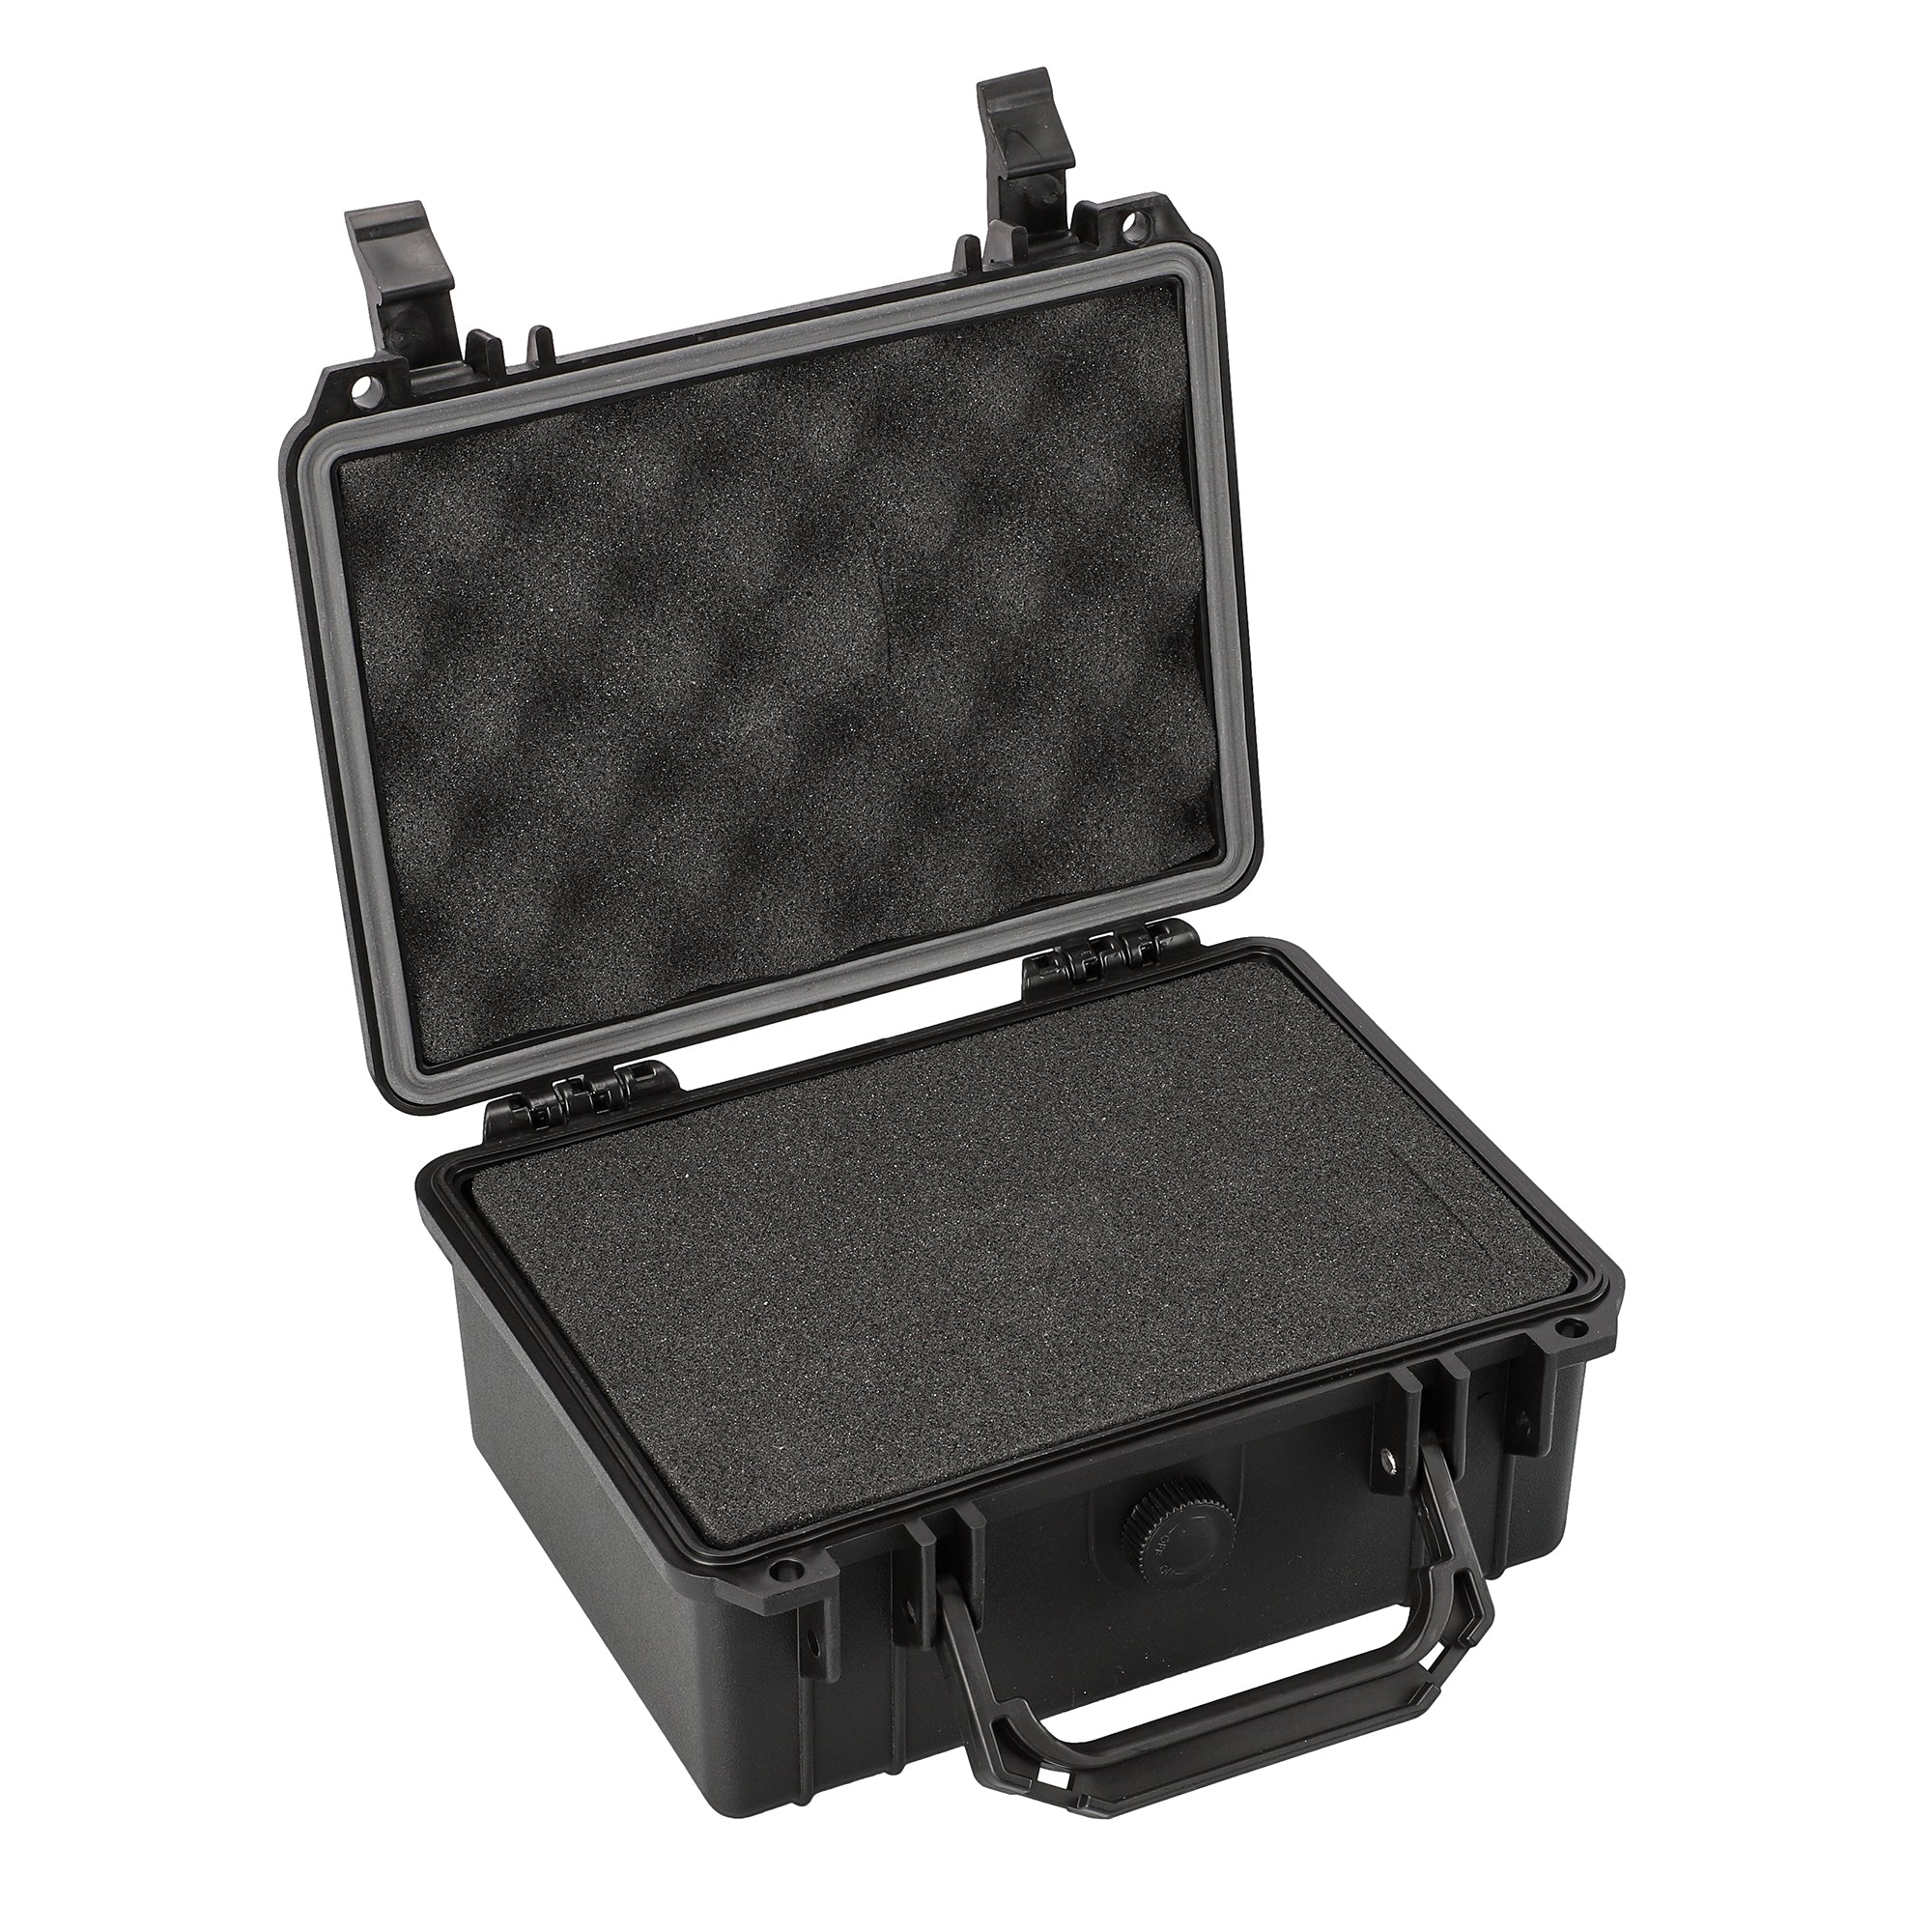 Pittsburgh P20001 Small Waterproof Security Safe Case